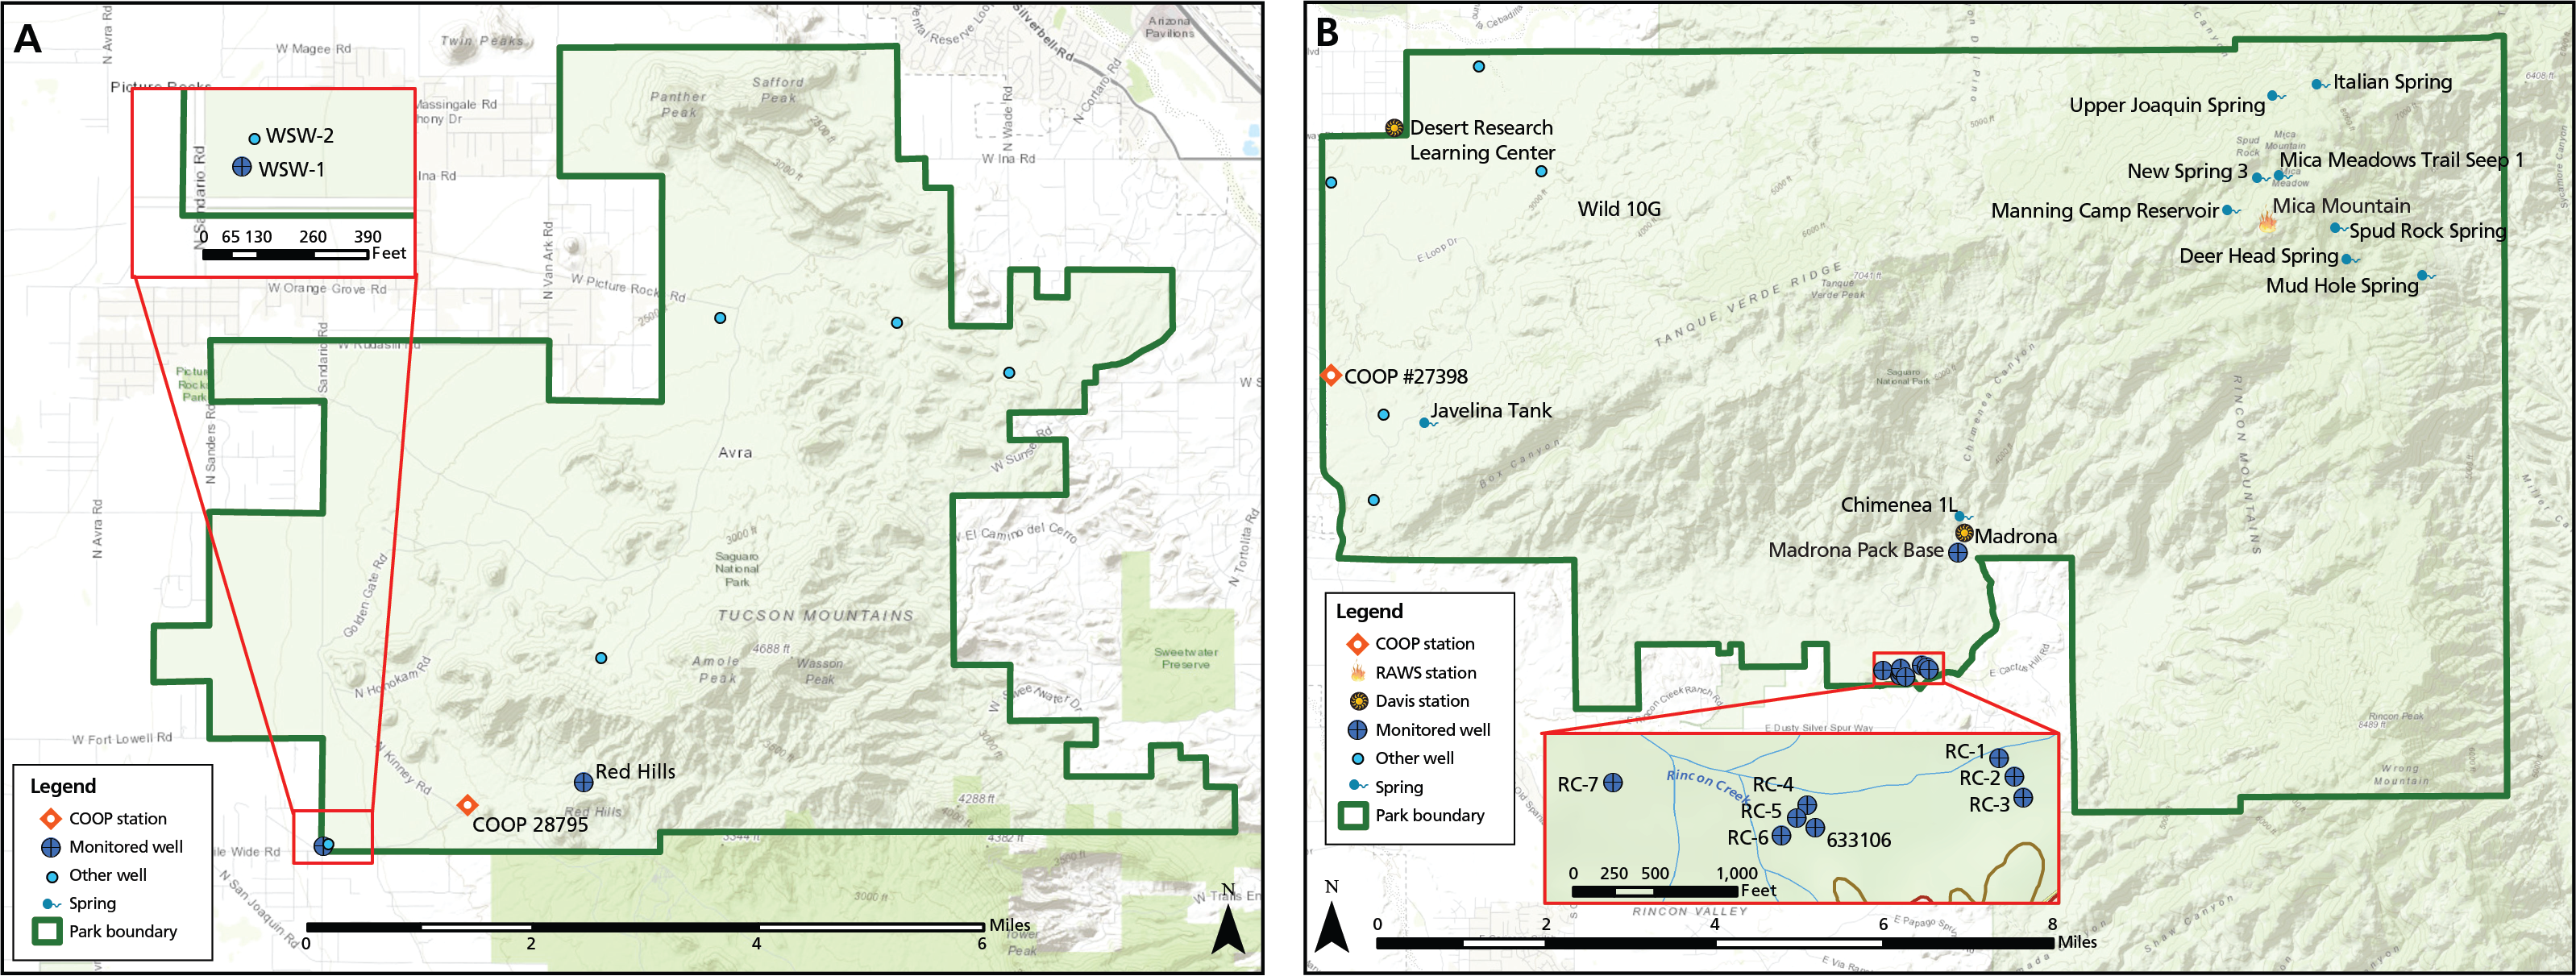 Maps of Saguaro NP districts with locations of weather stations, groundwater wells, and springs